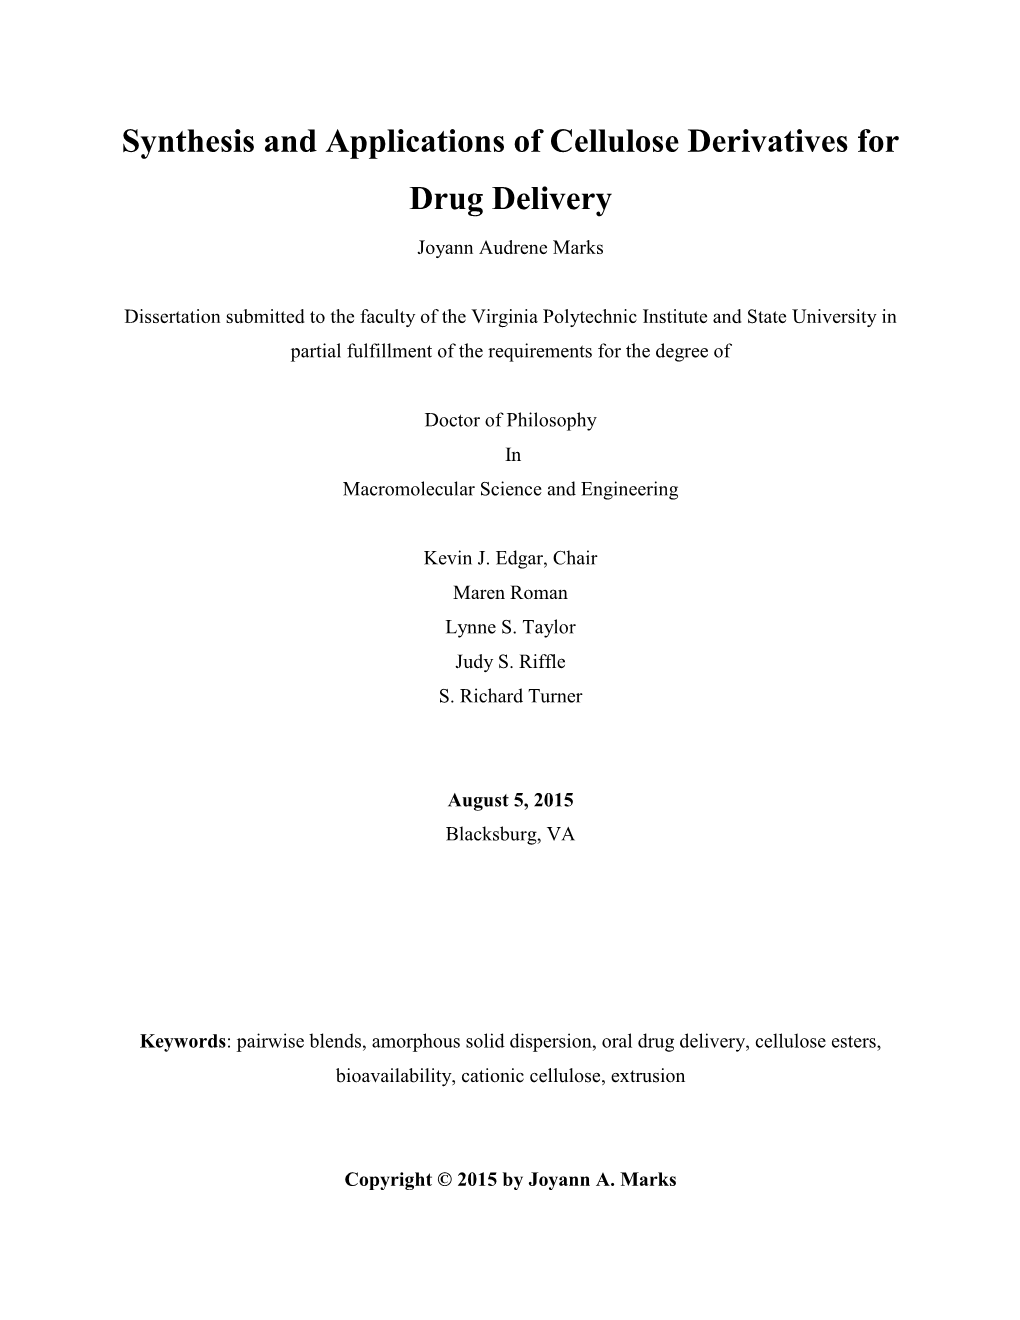 Synthesis and Applications of Cellulose Derivatives for Drug Delivery